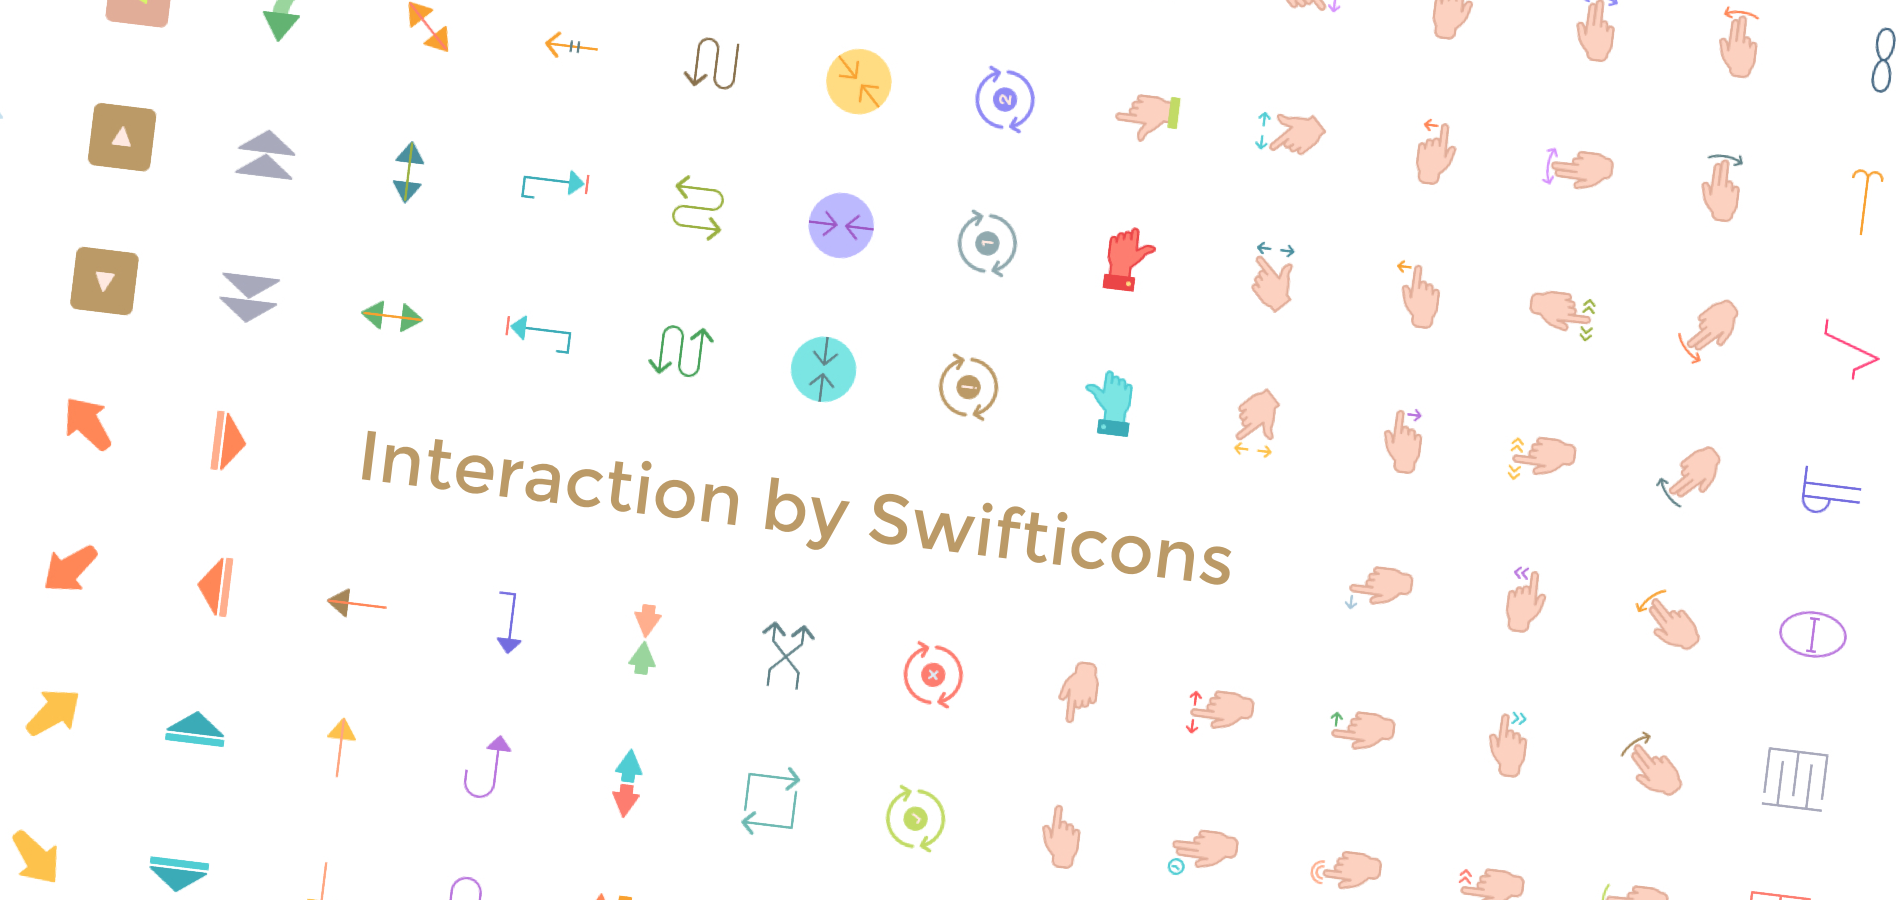 Free Download: 120+ Interaction Icons